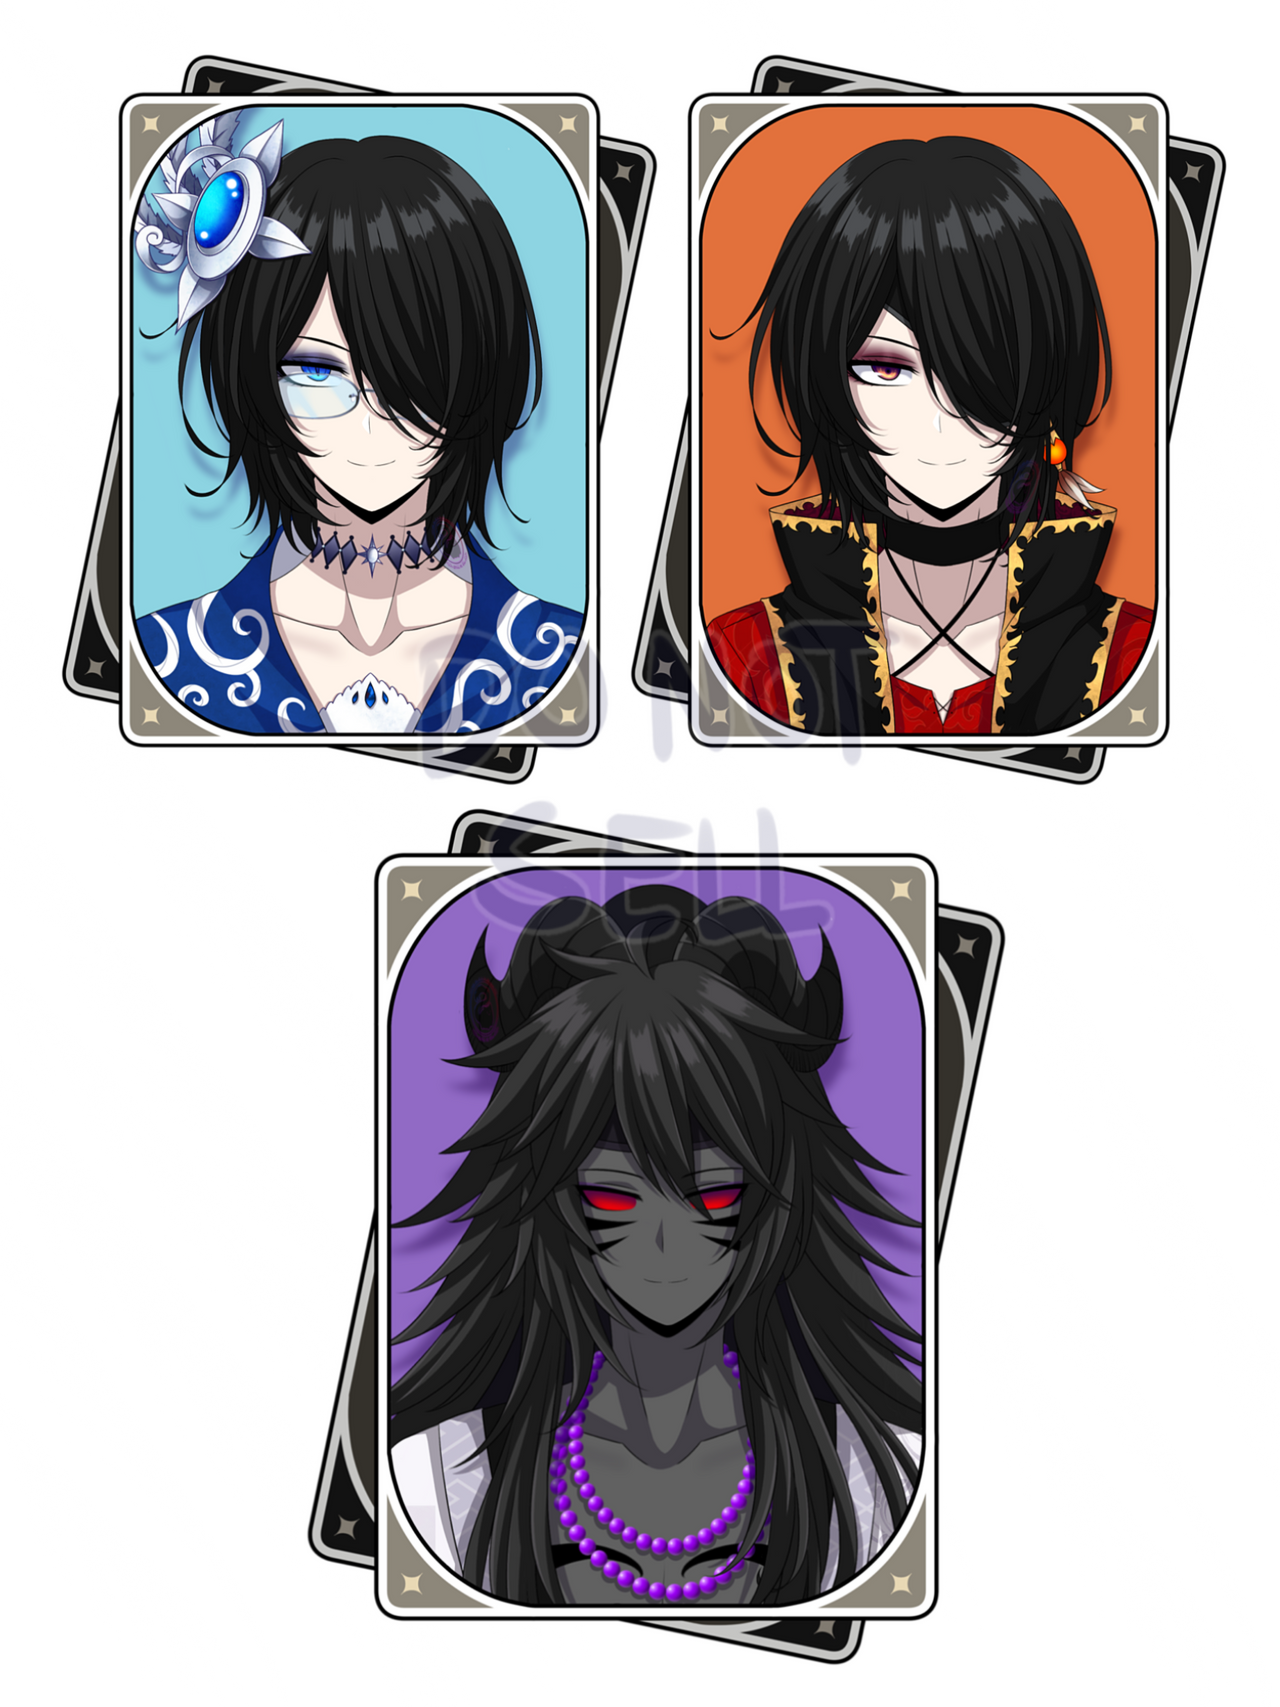 Genshin Character Cards[The Unholy Roommates ver.] by CNeko-chan